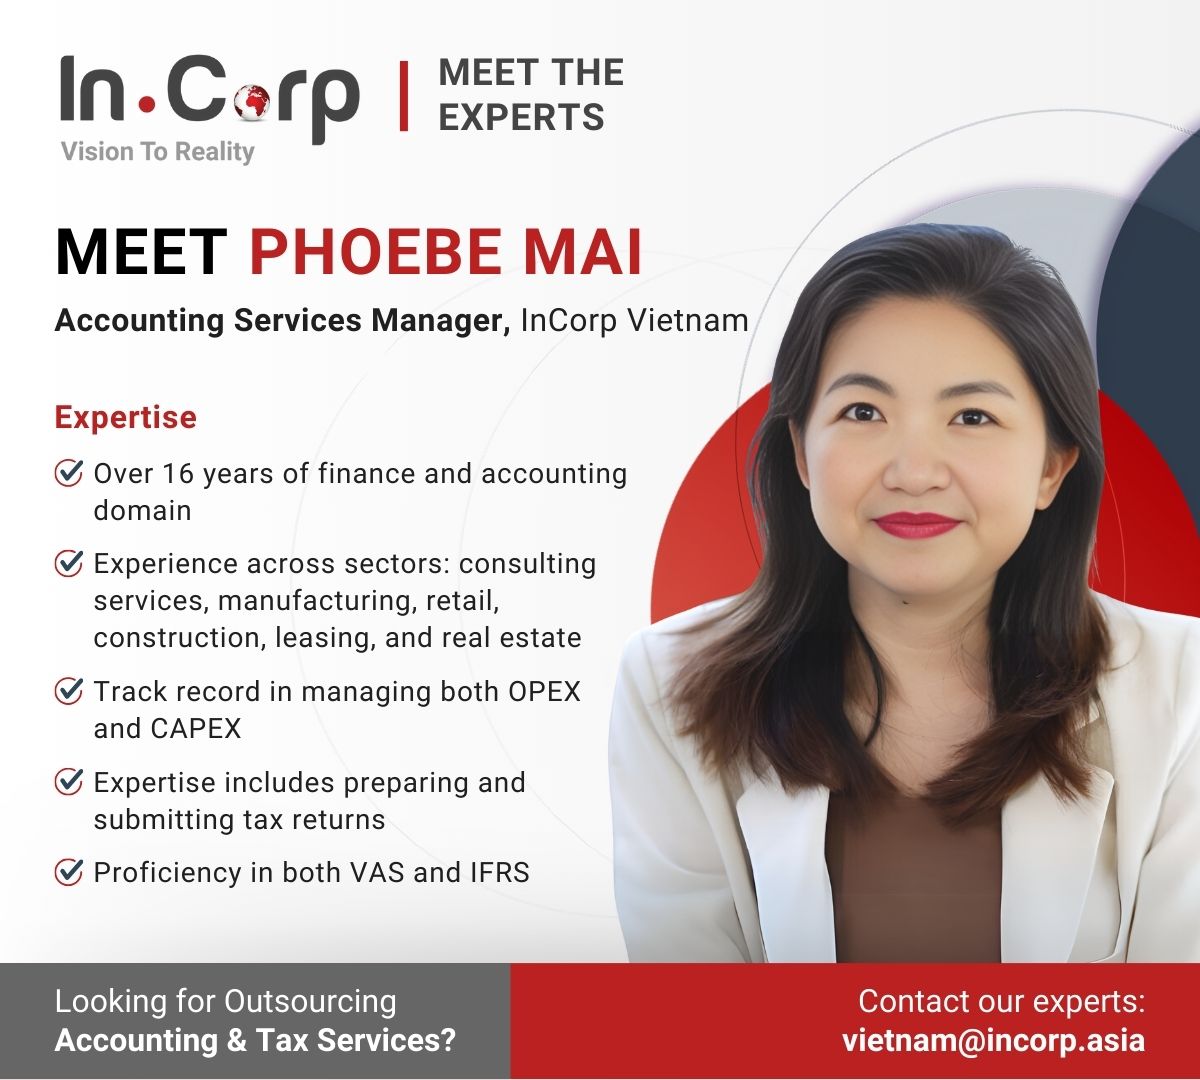 Phoebe Mai - Expert Consulting Tax Services in Vietnam